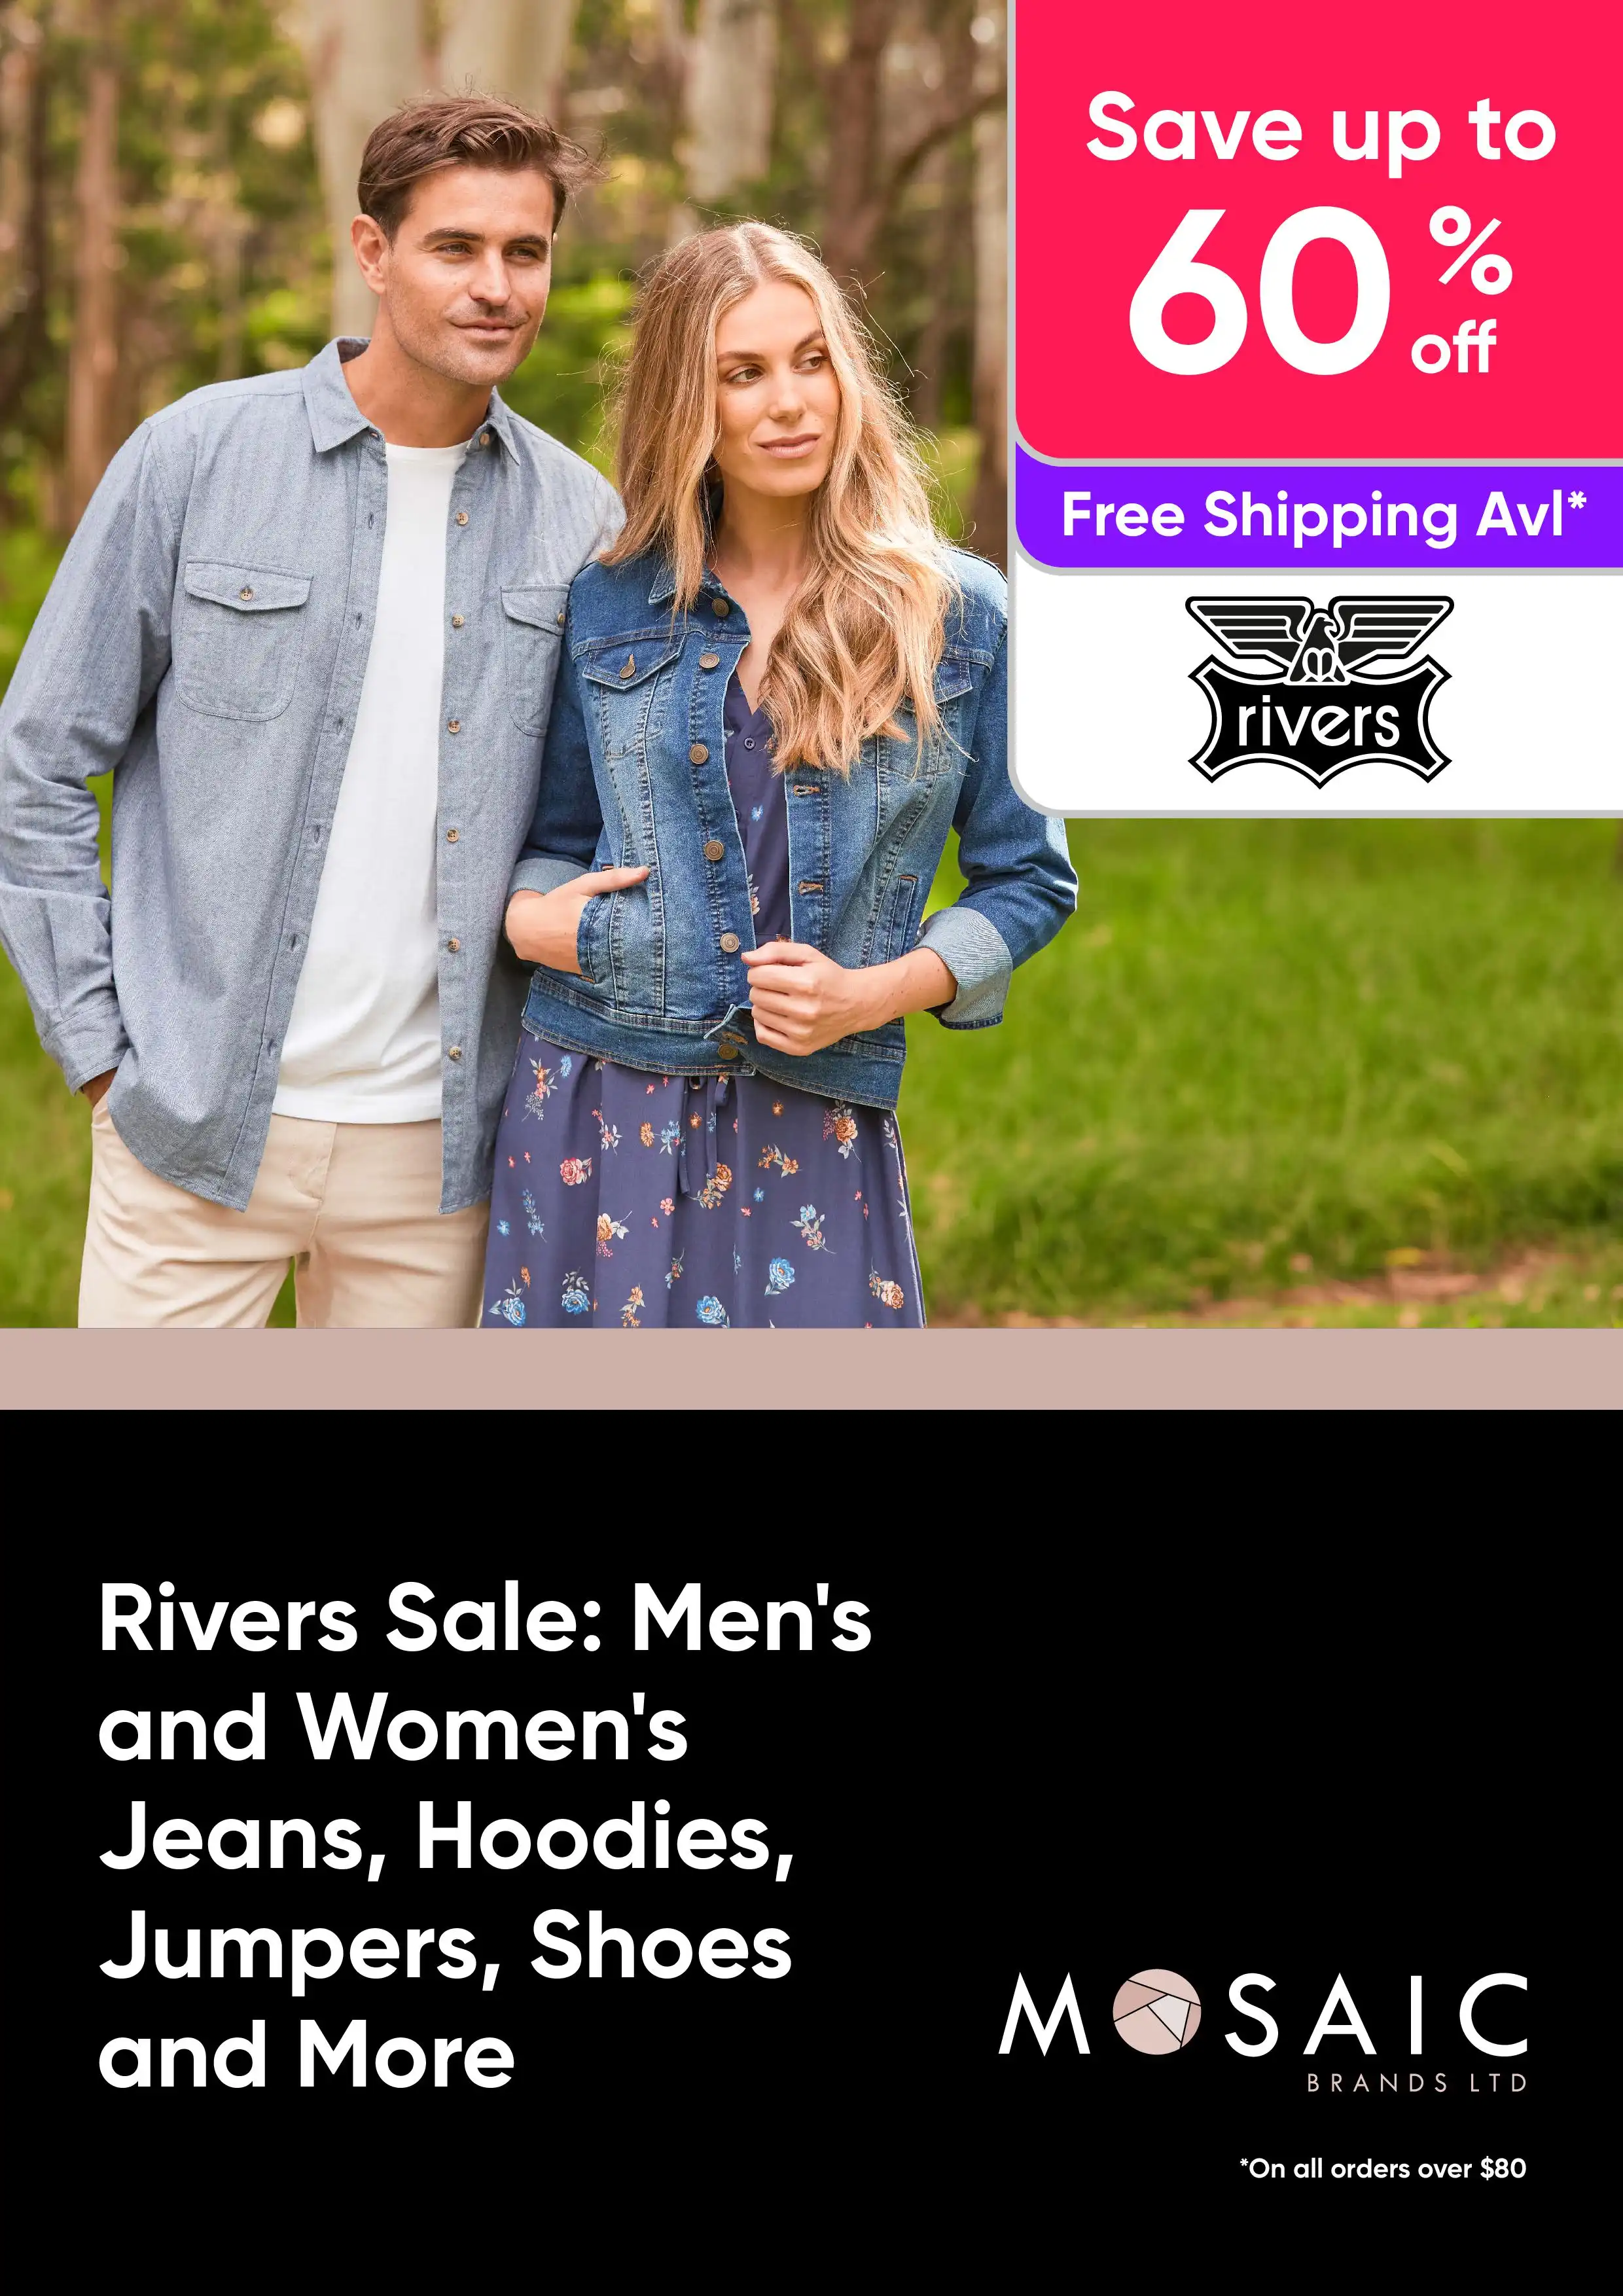 Rivers Sale - Men's and Women's Jeans, Hoodies, Jumpers, Shoes and More - up to 60% off